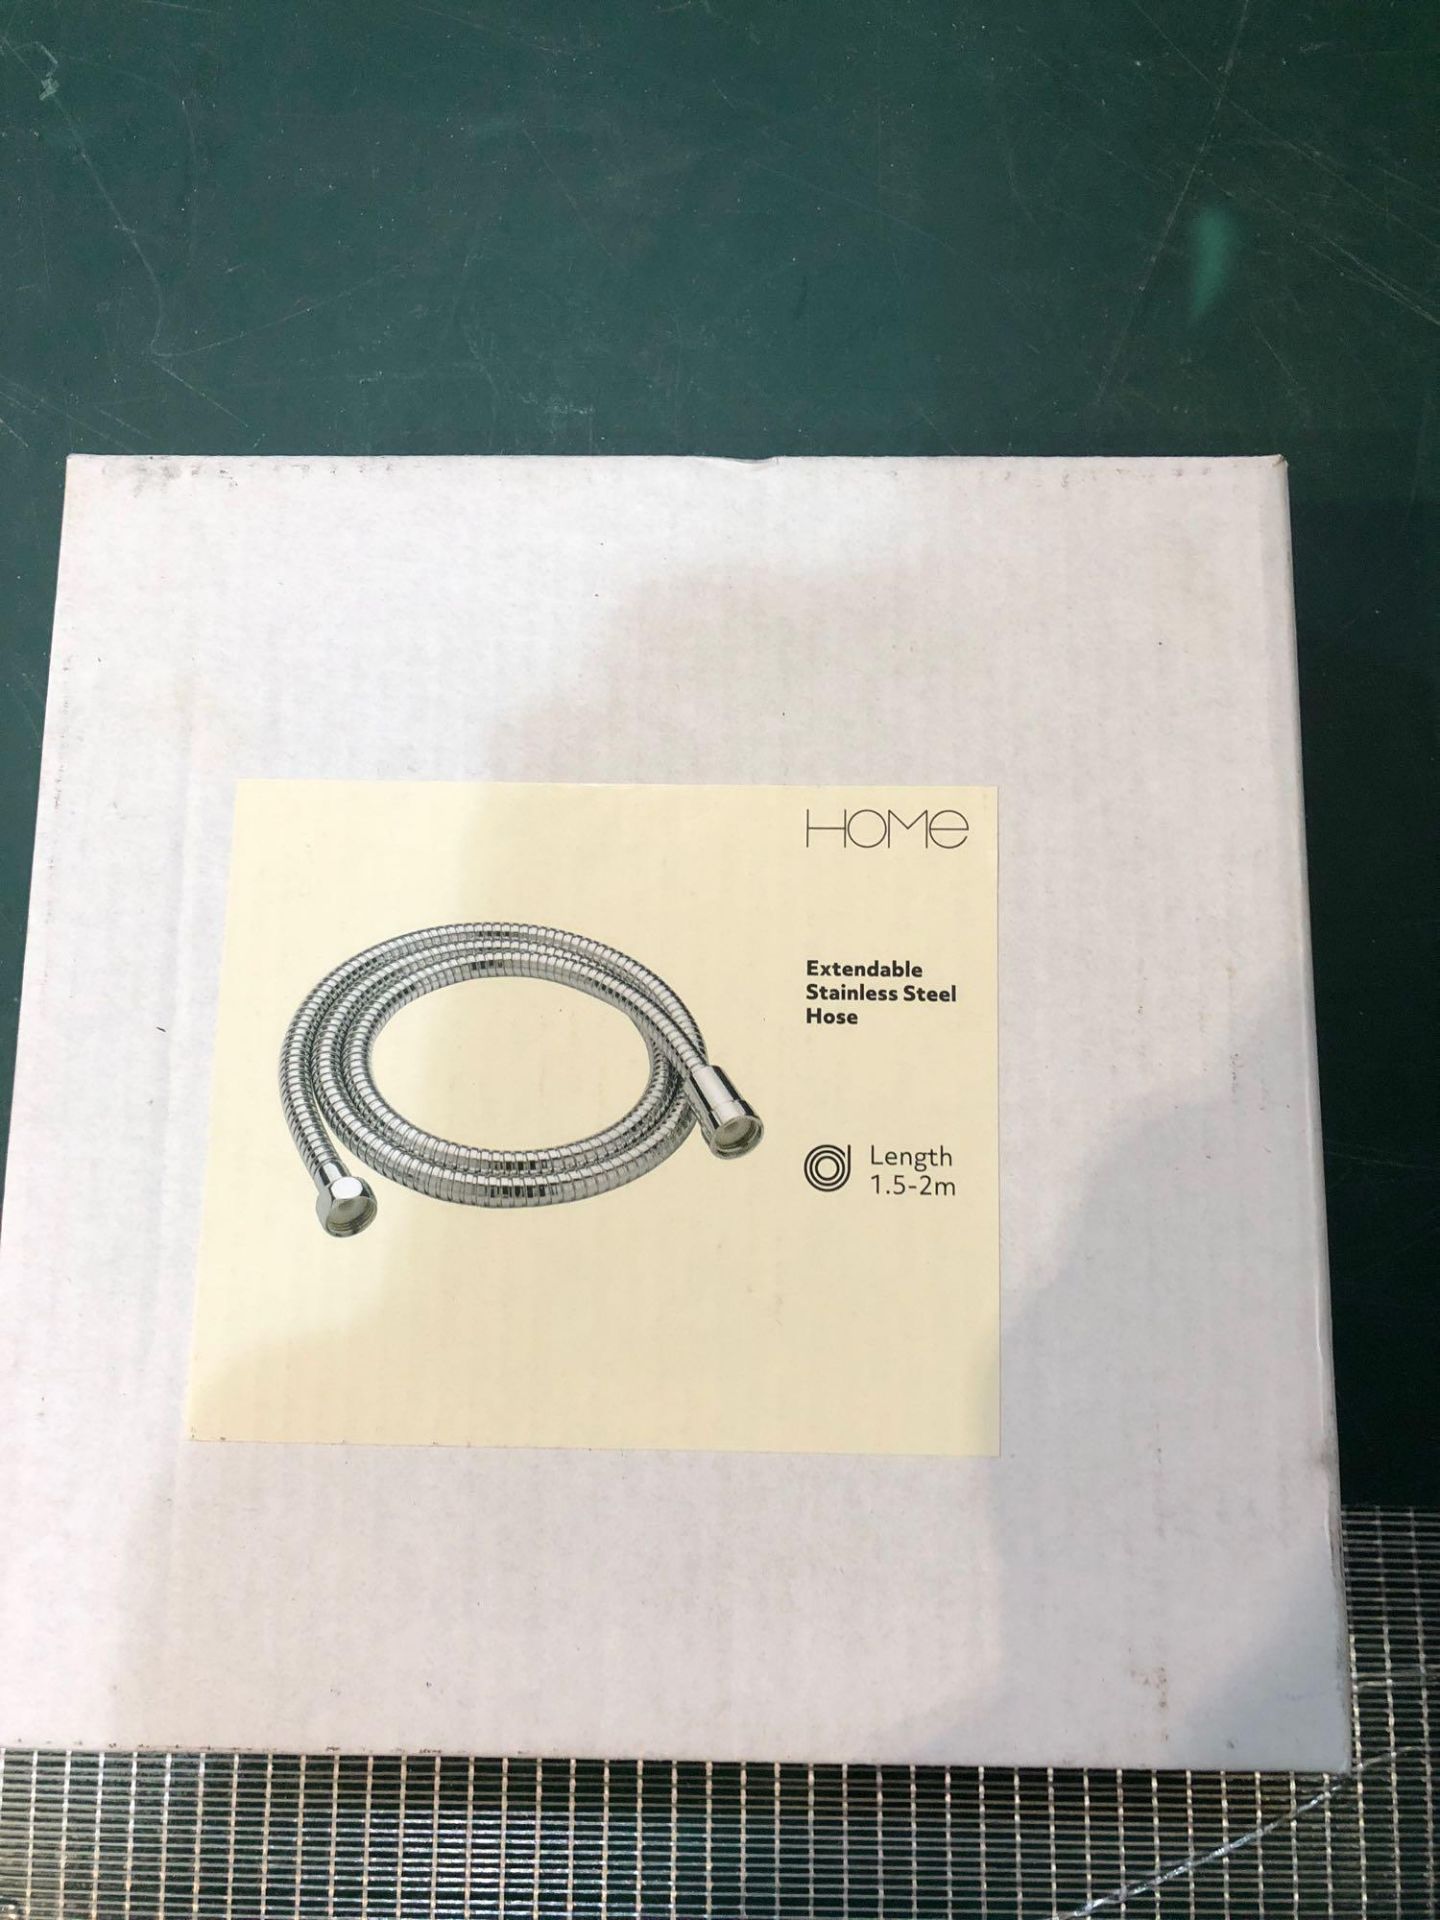 Argos Home Extendable 2m Stainless Steel Shower Hose 141/9614 £10.00 RRP - Image 2 of 3